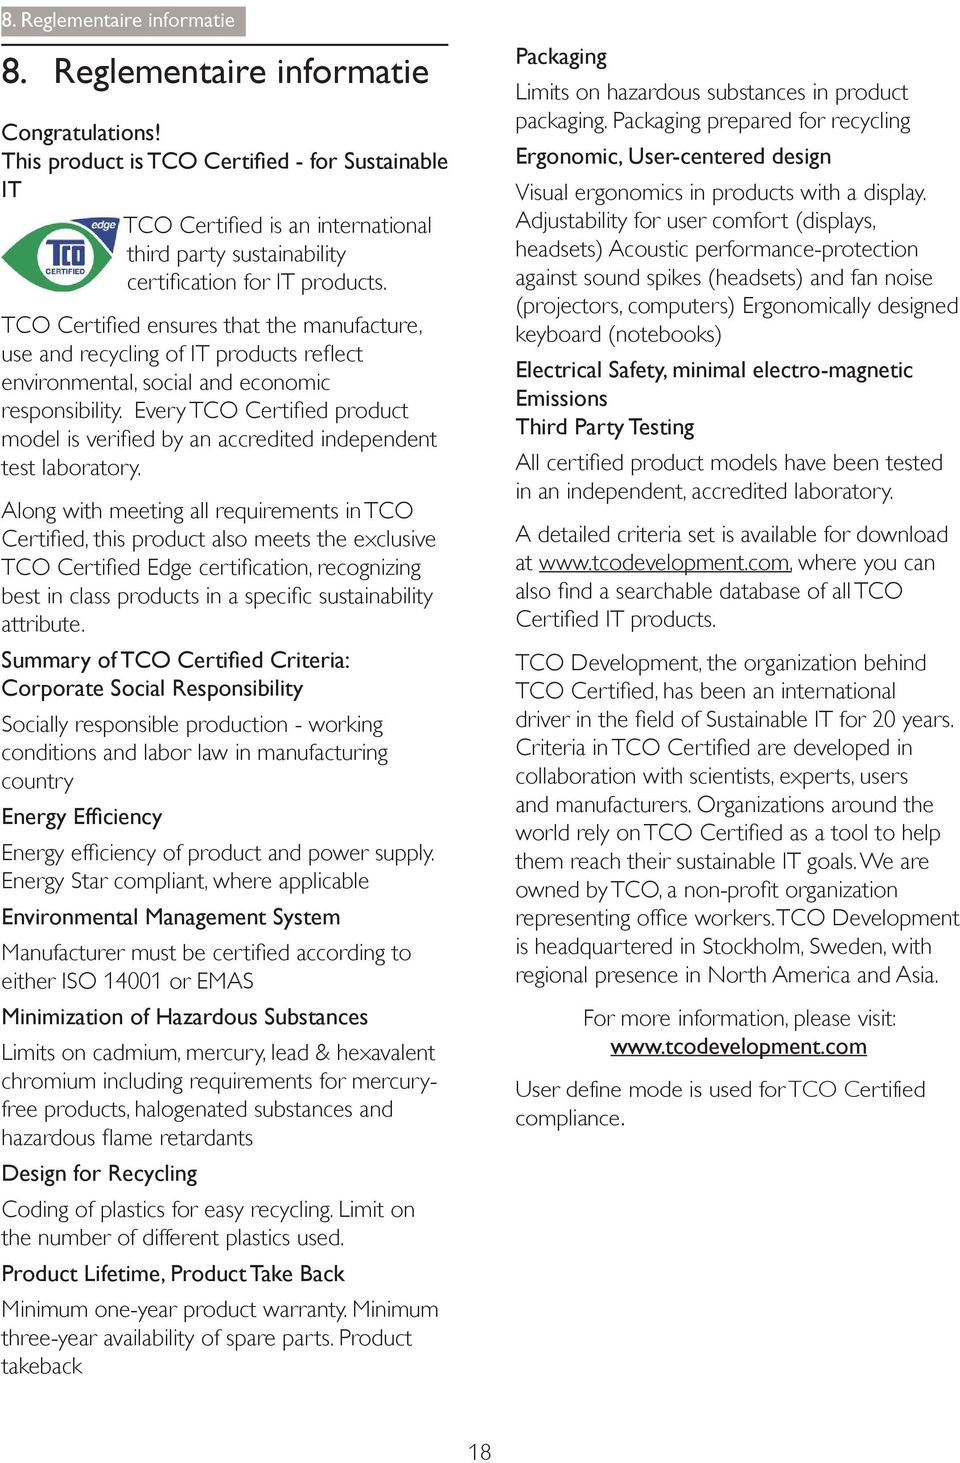 Summary of TCO Certi ed Criteria Corporate Social Responsibility Socially responsible production - working conditions and labor law in manufacturing country Energy Ef ciency Energy Star compliant,